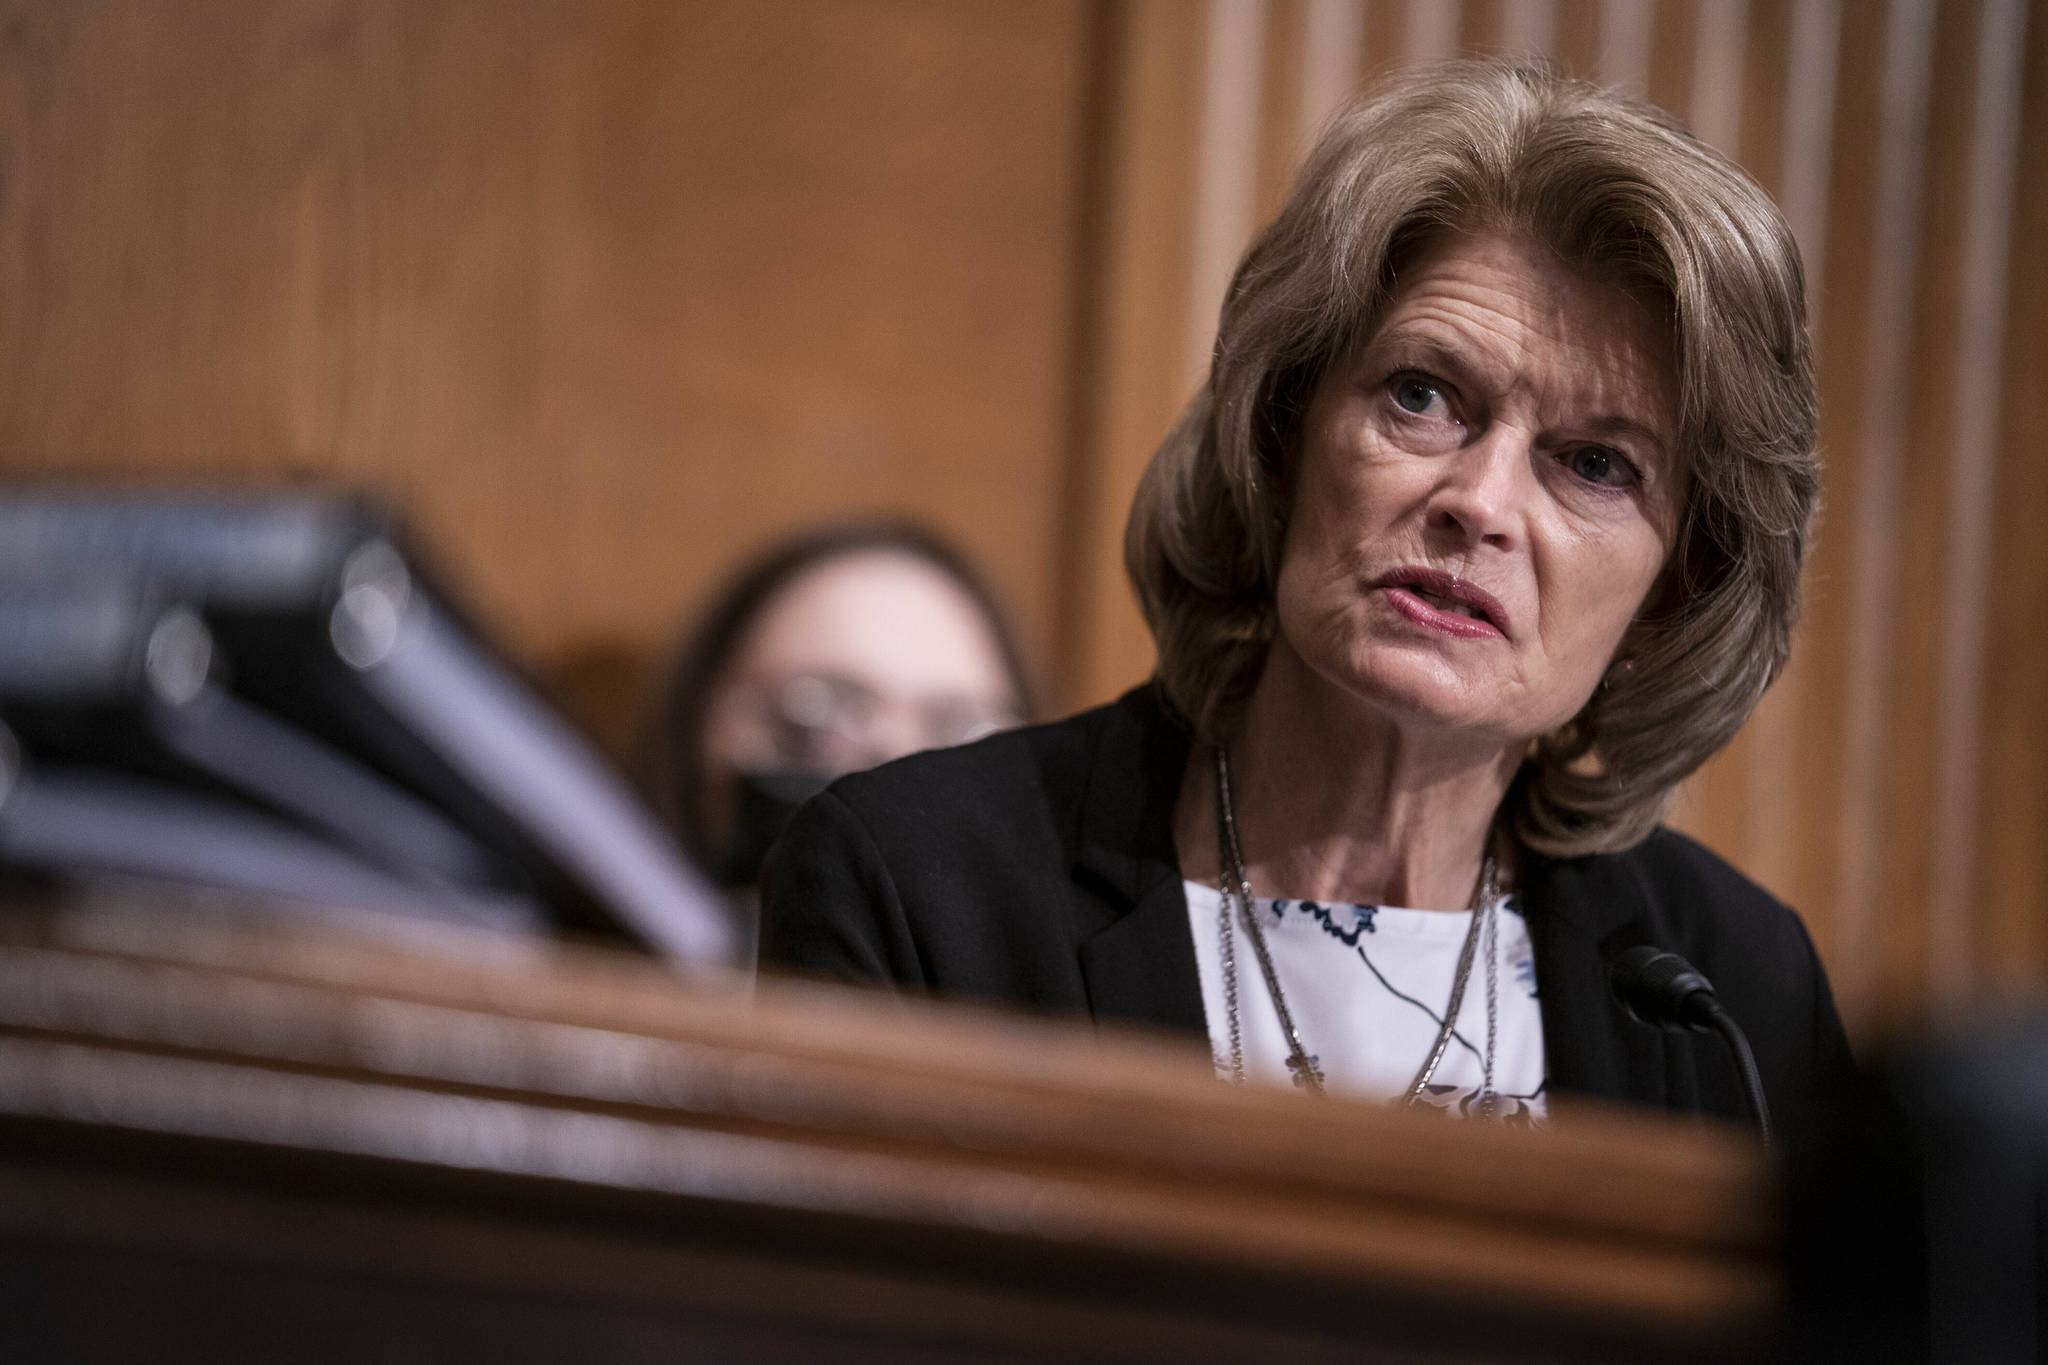 In this Feb 23, 2021, file photo, U.S. Sen. Lisa Murkowski, R-Alaska, speaks during a hearing on Capitol Hill in Washington. The Alaska Republican Party has not only censured Sen. Murkowski for voting to convict former President Donald Trump in his impeachment trial, but it also does not want her to identity as a GOP candidate in next year’s election, a member of the party’s State Central Committee said Tuesday, March 16, 2021. (Sarah Silbiger/Pool Photo via AP, File)